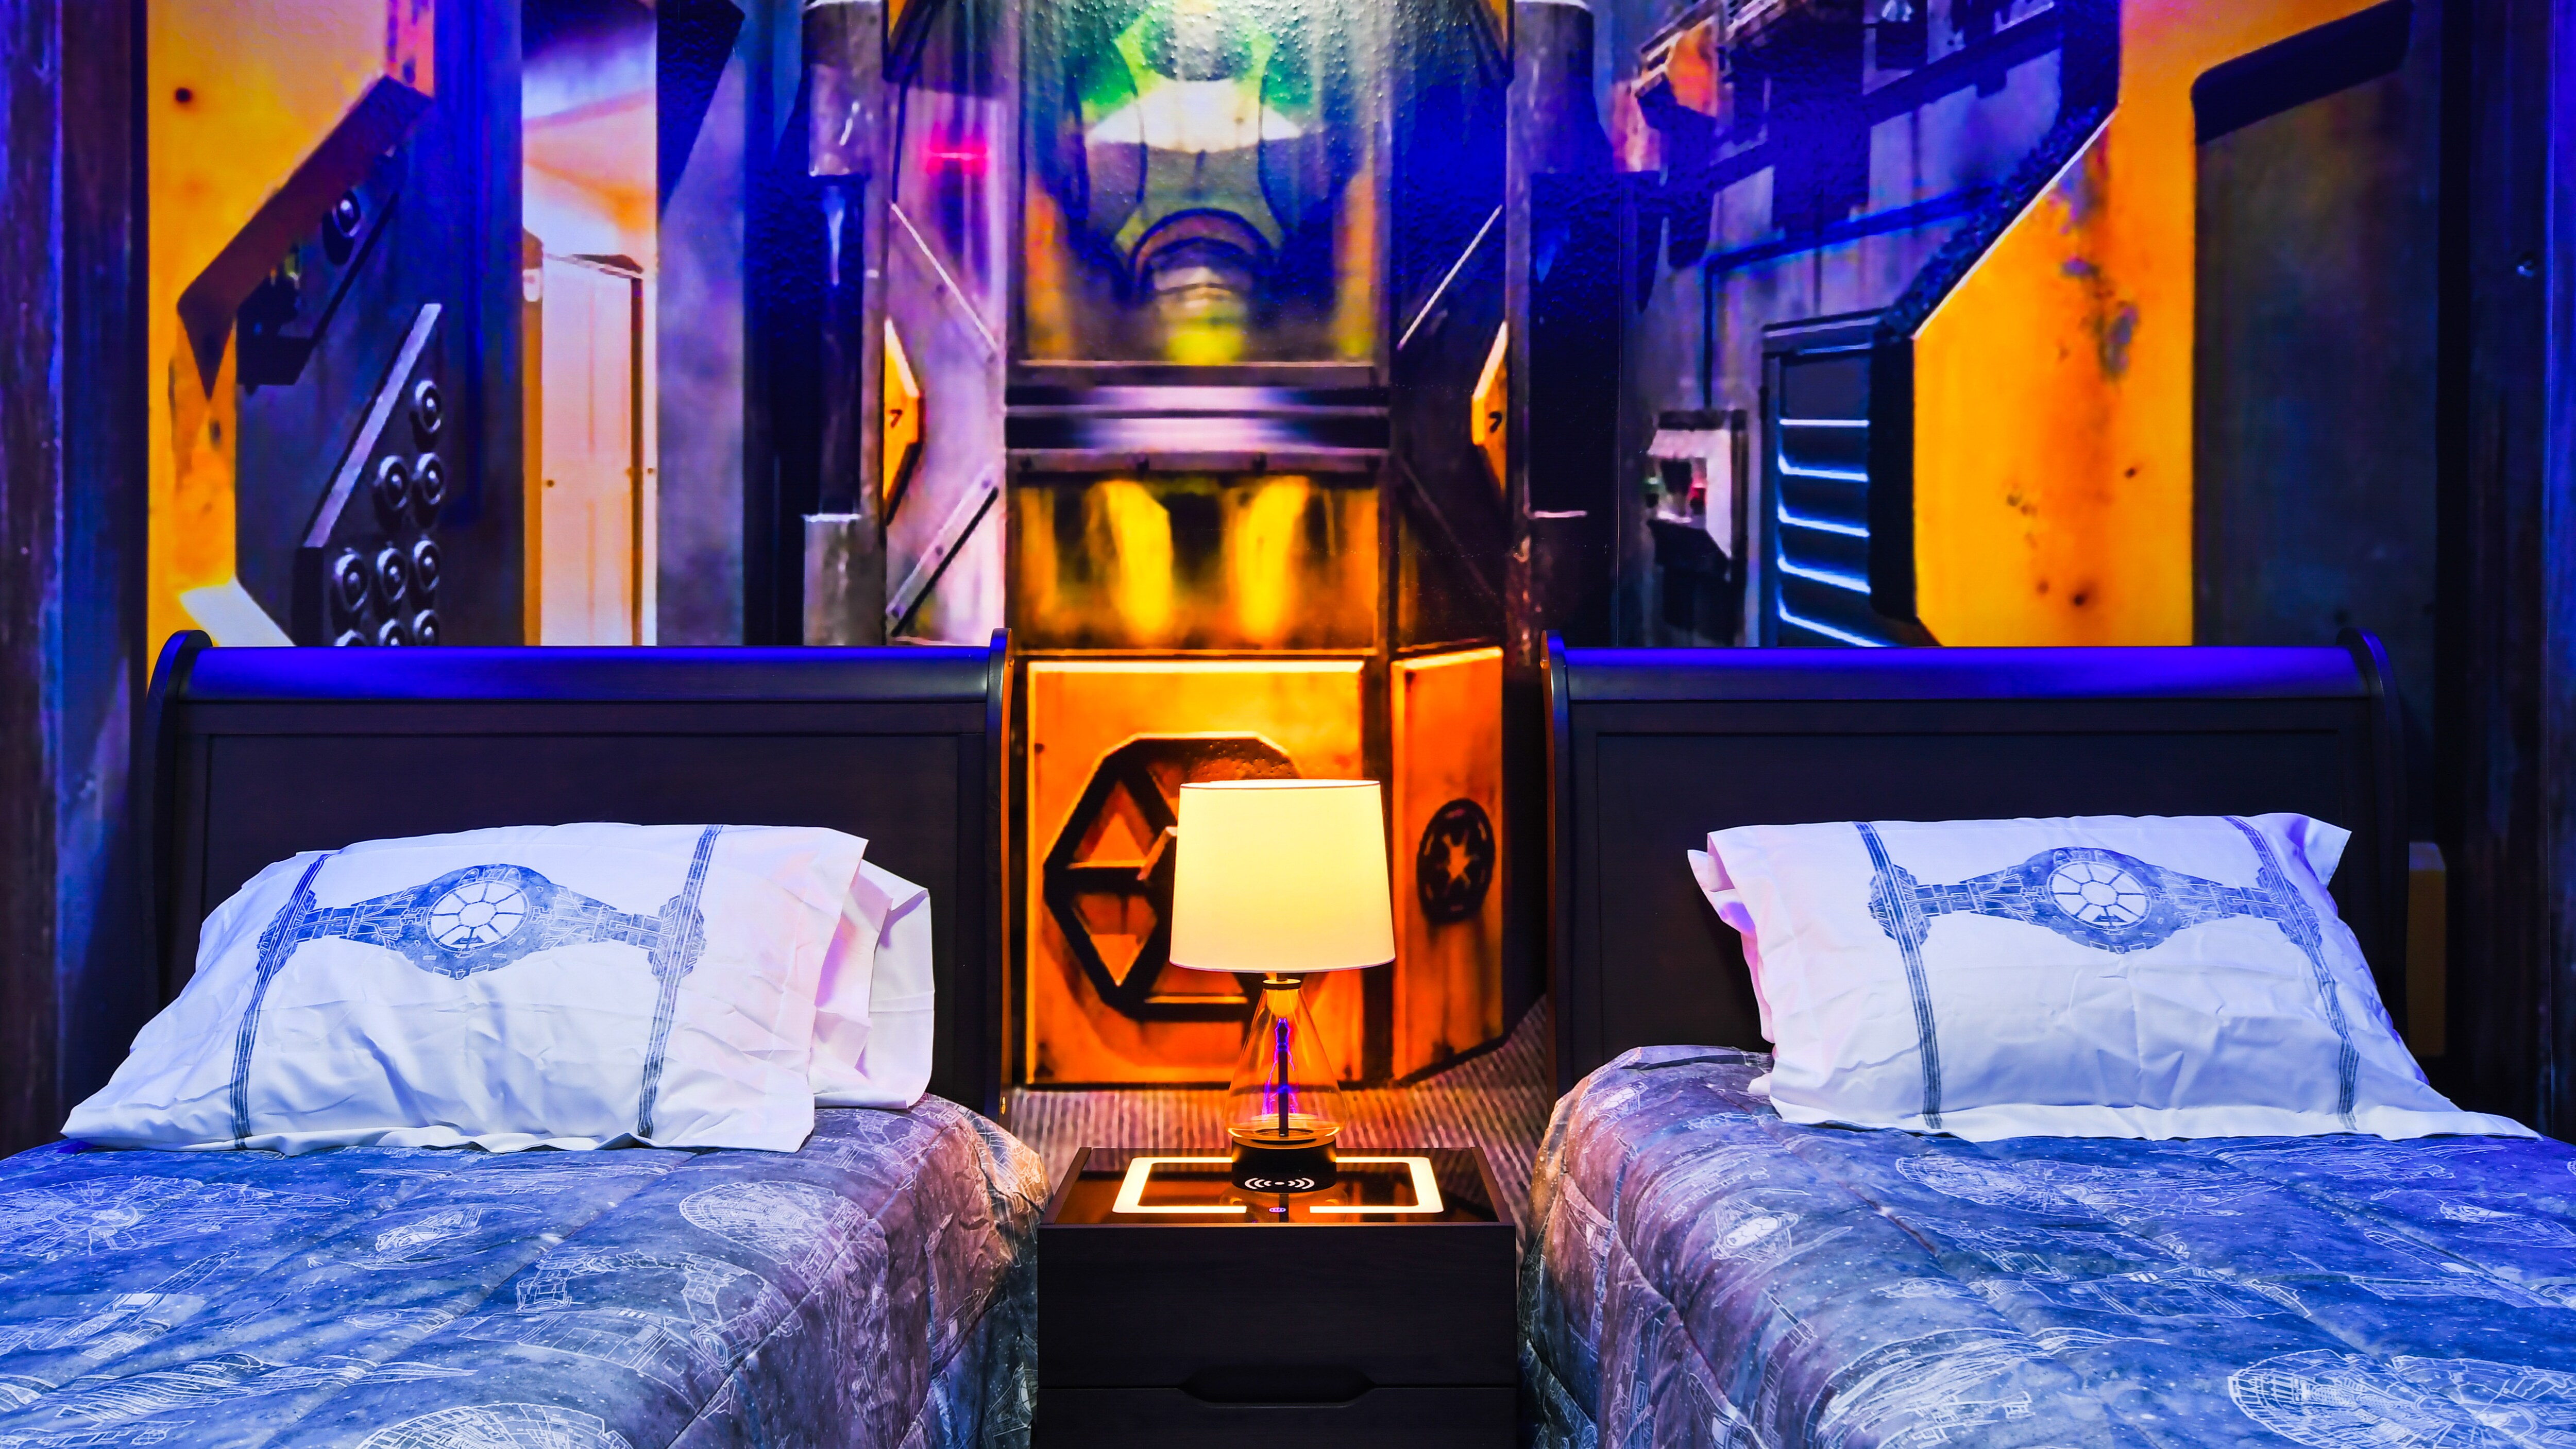 Sleep in style! Galactic dreams await in this star-themed room